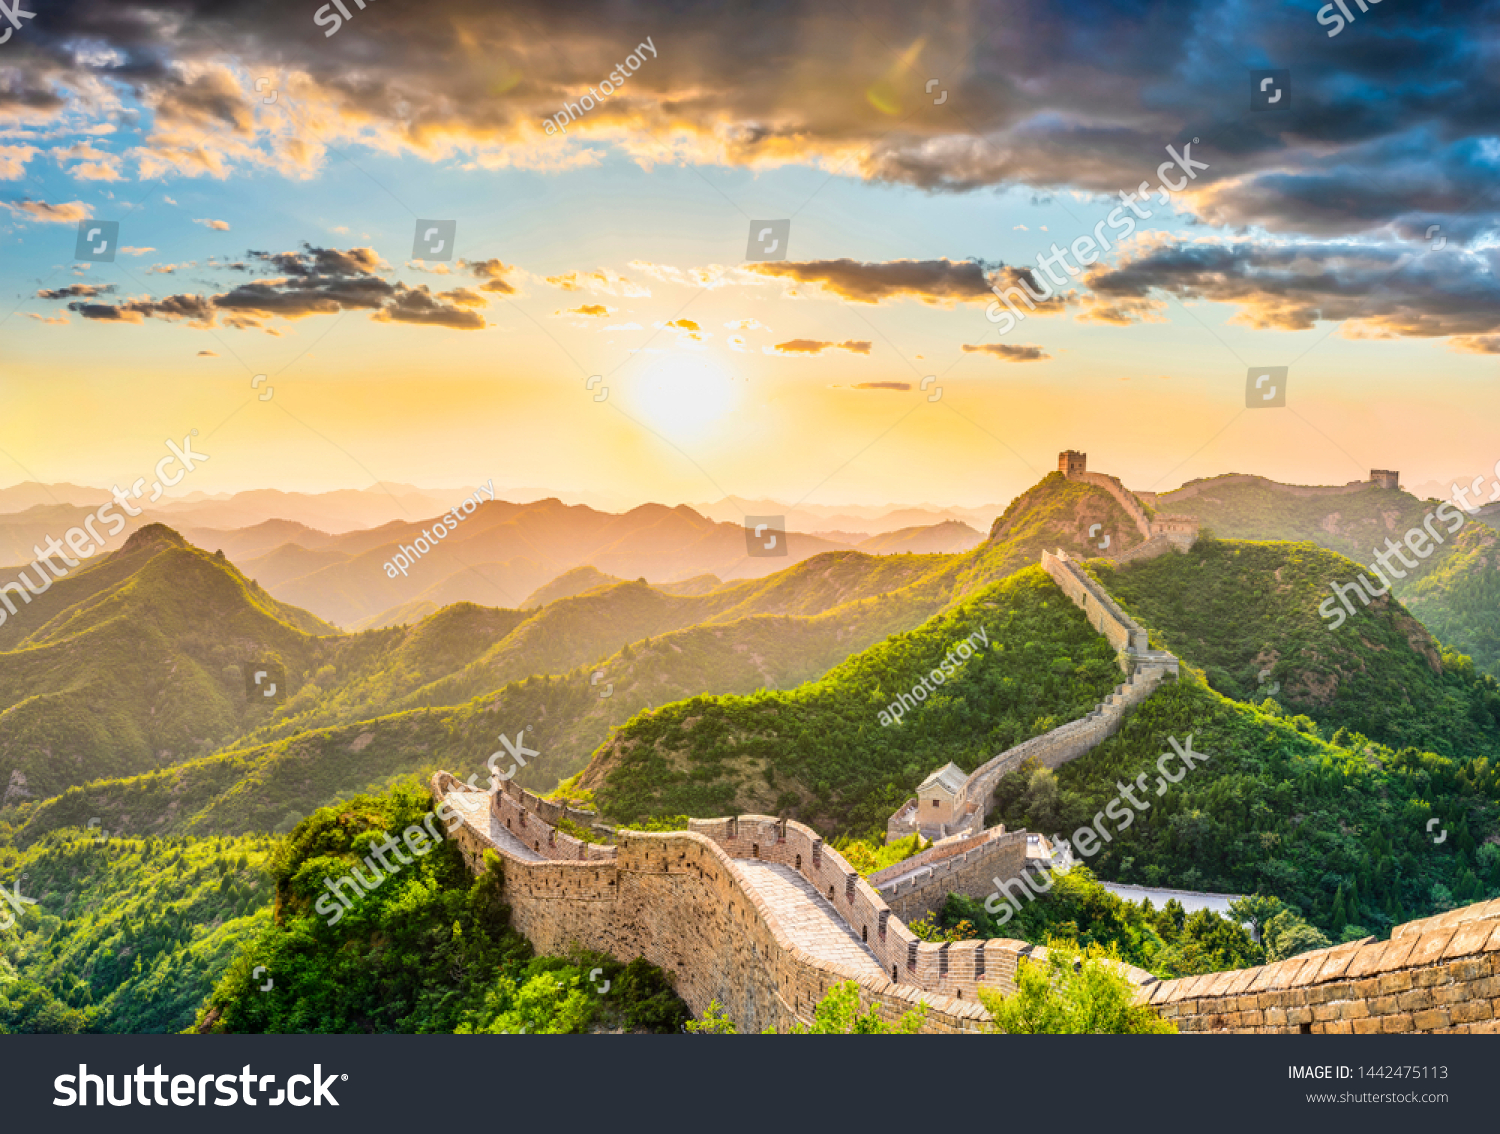 The Great Wall of China #1442475113